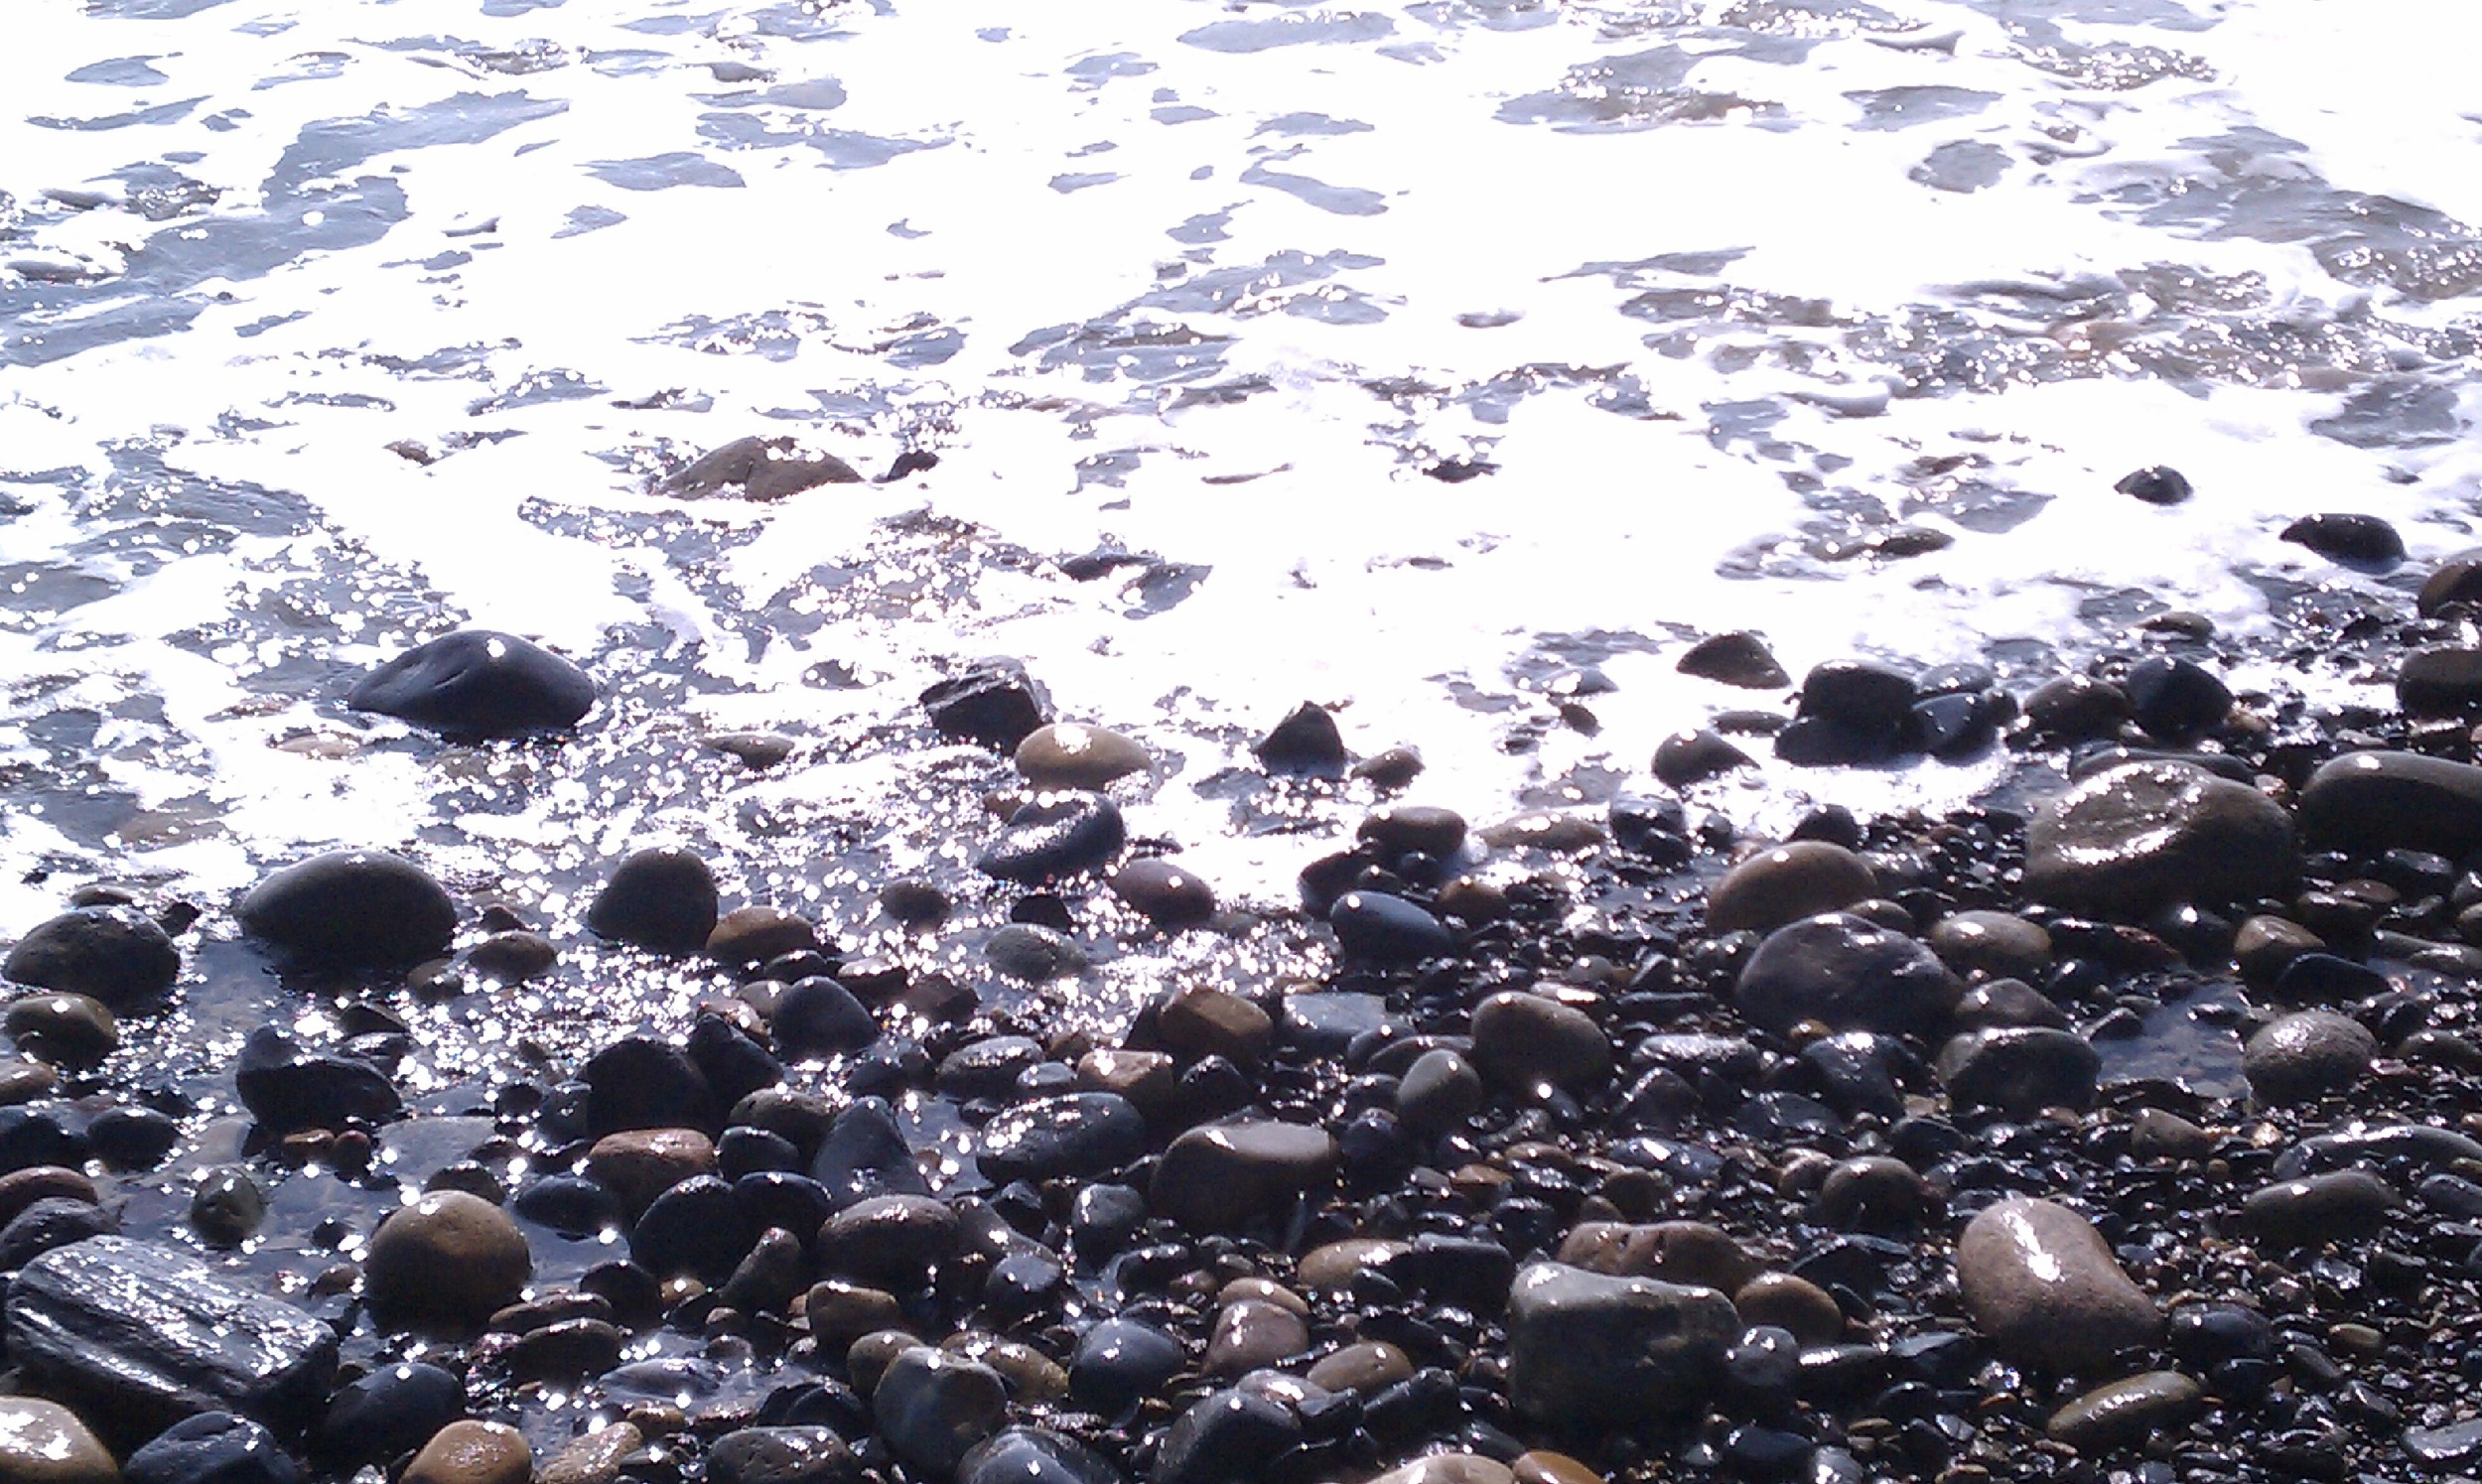 water lapping the pebble shore